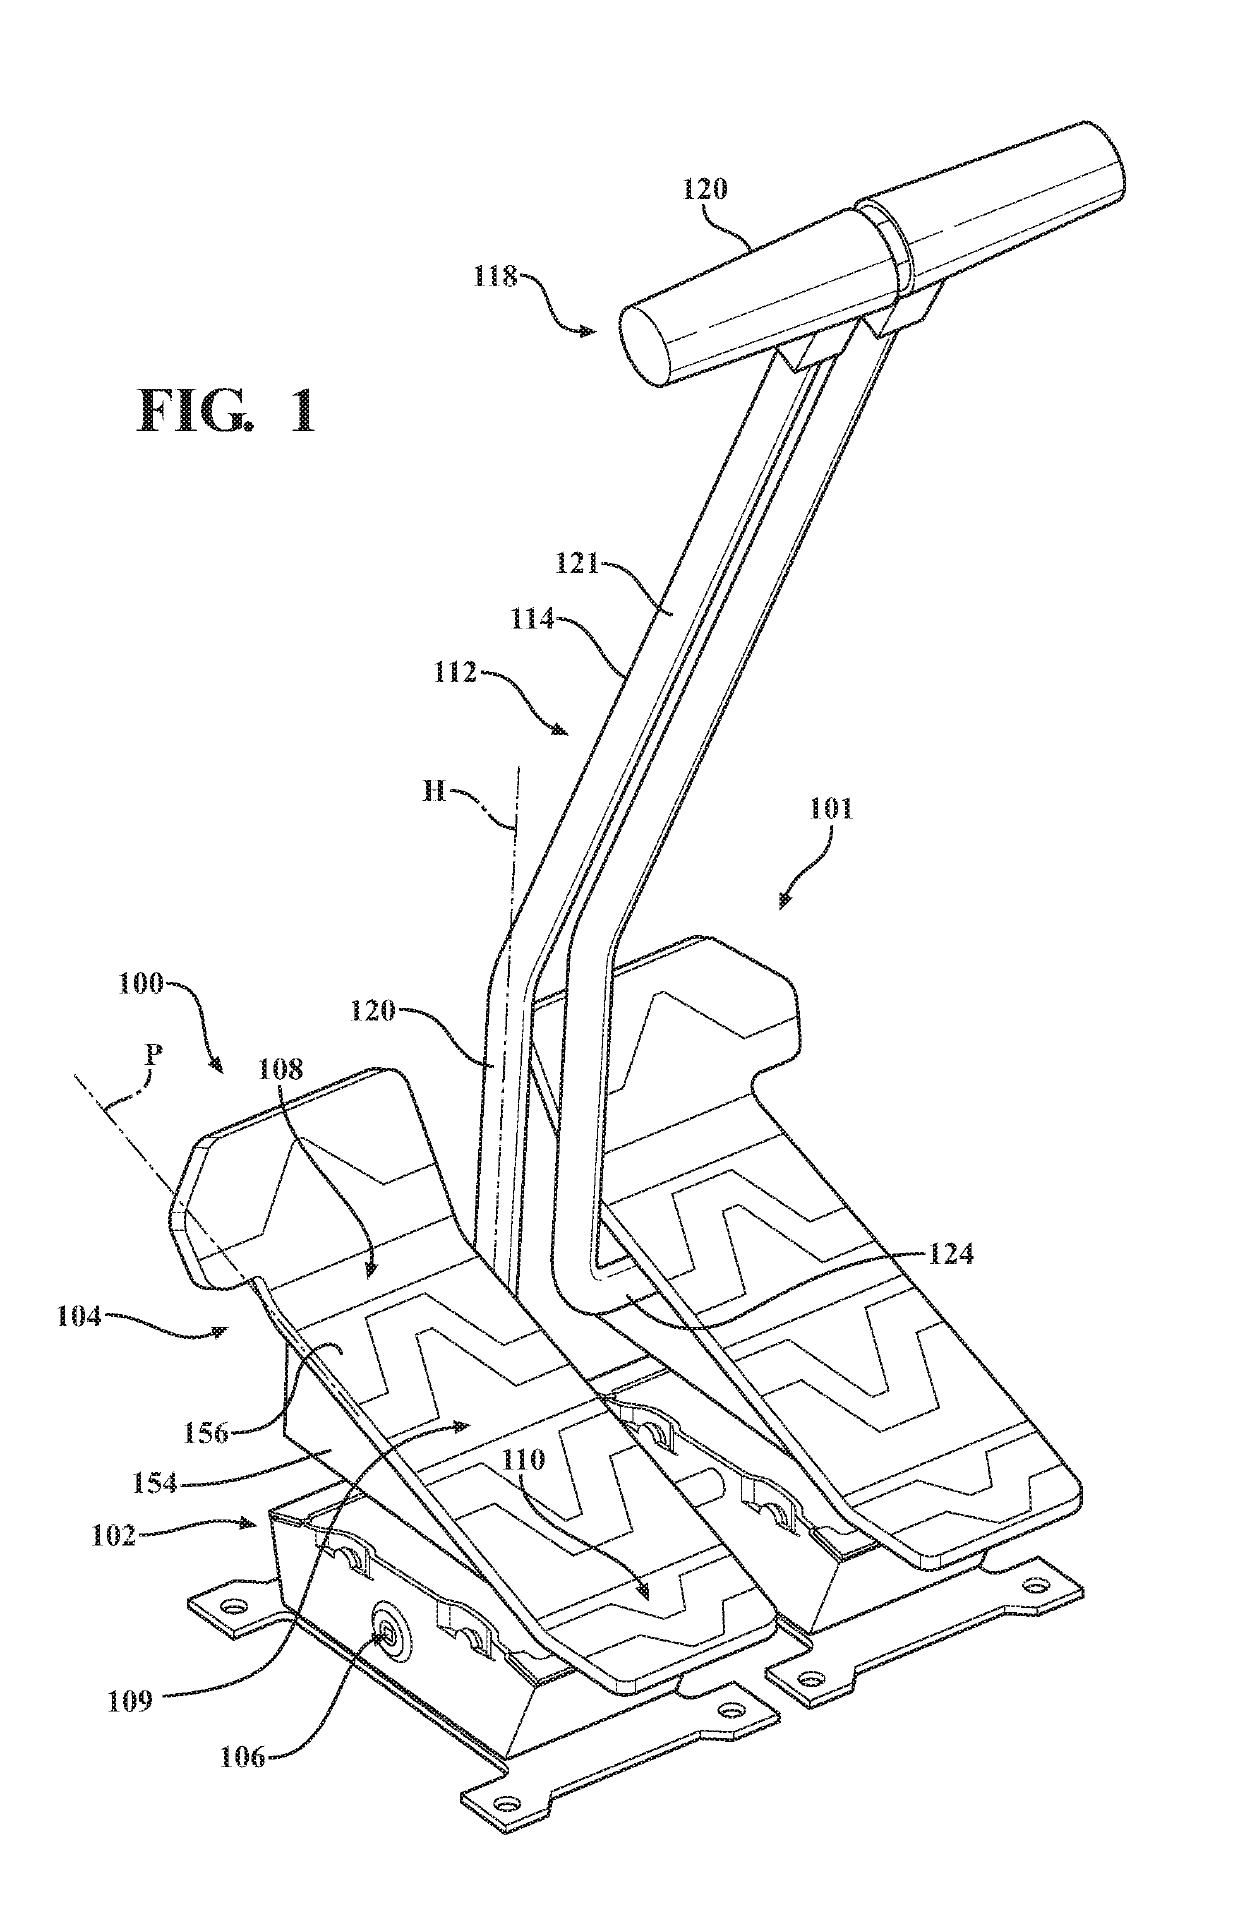 Bidirectional pedal assembly